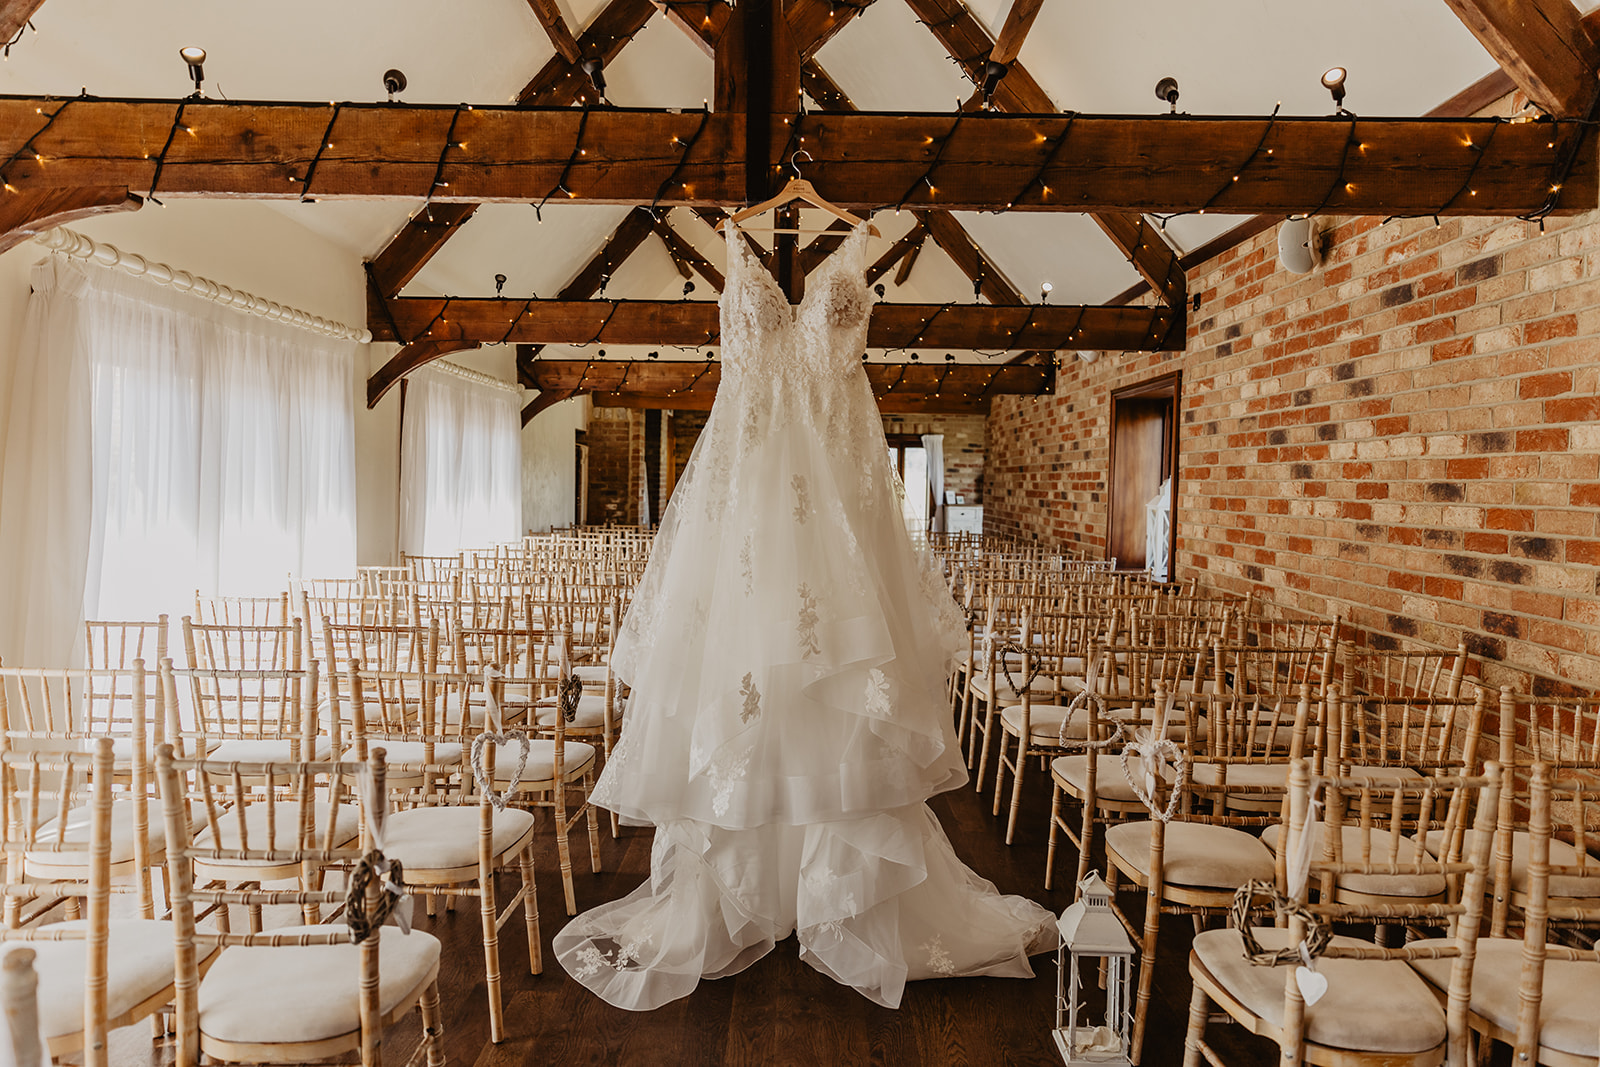 Wedding dress hanging up at a wedding at Long Furlong Barn, Sussex. By OliveJoy Photography.